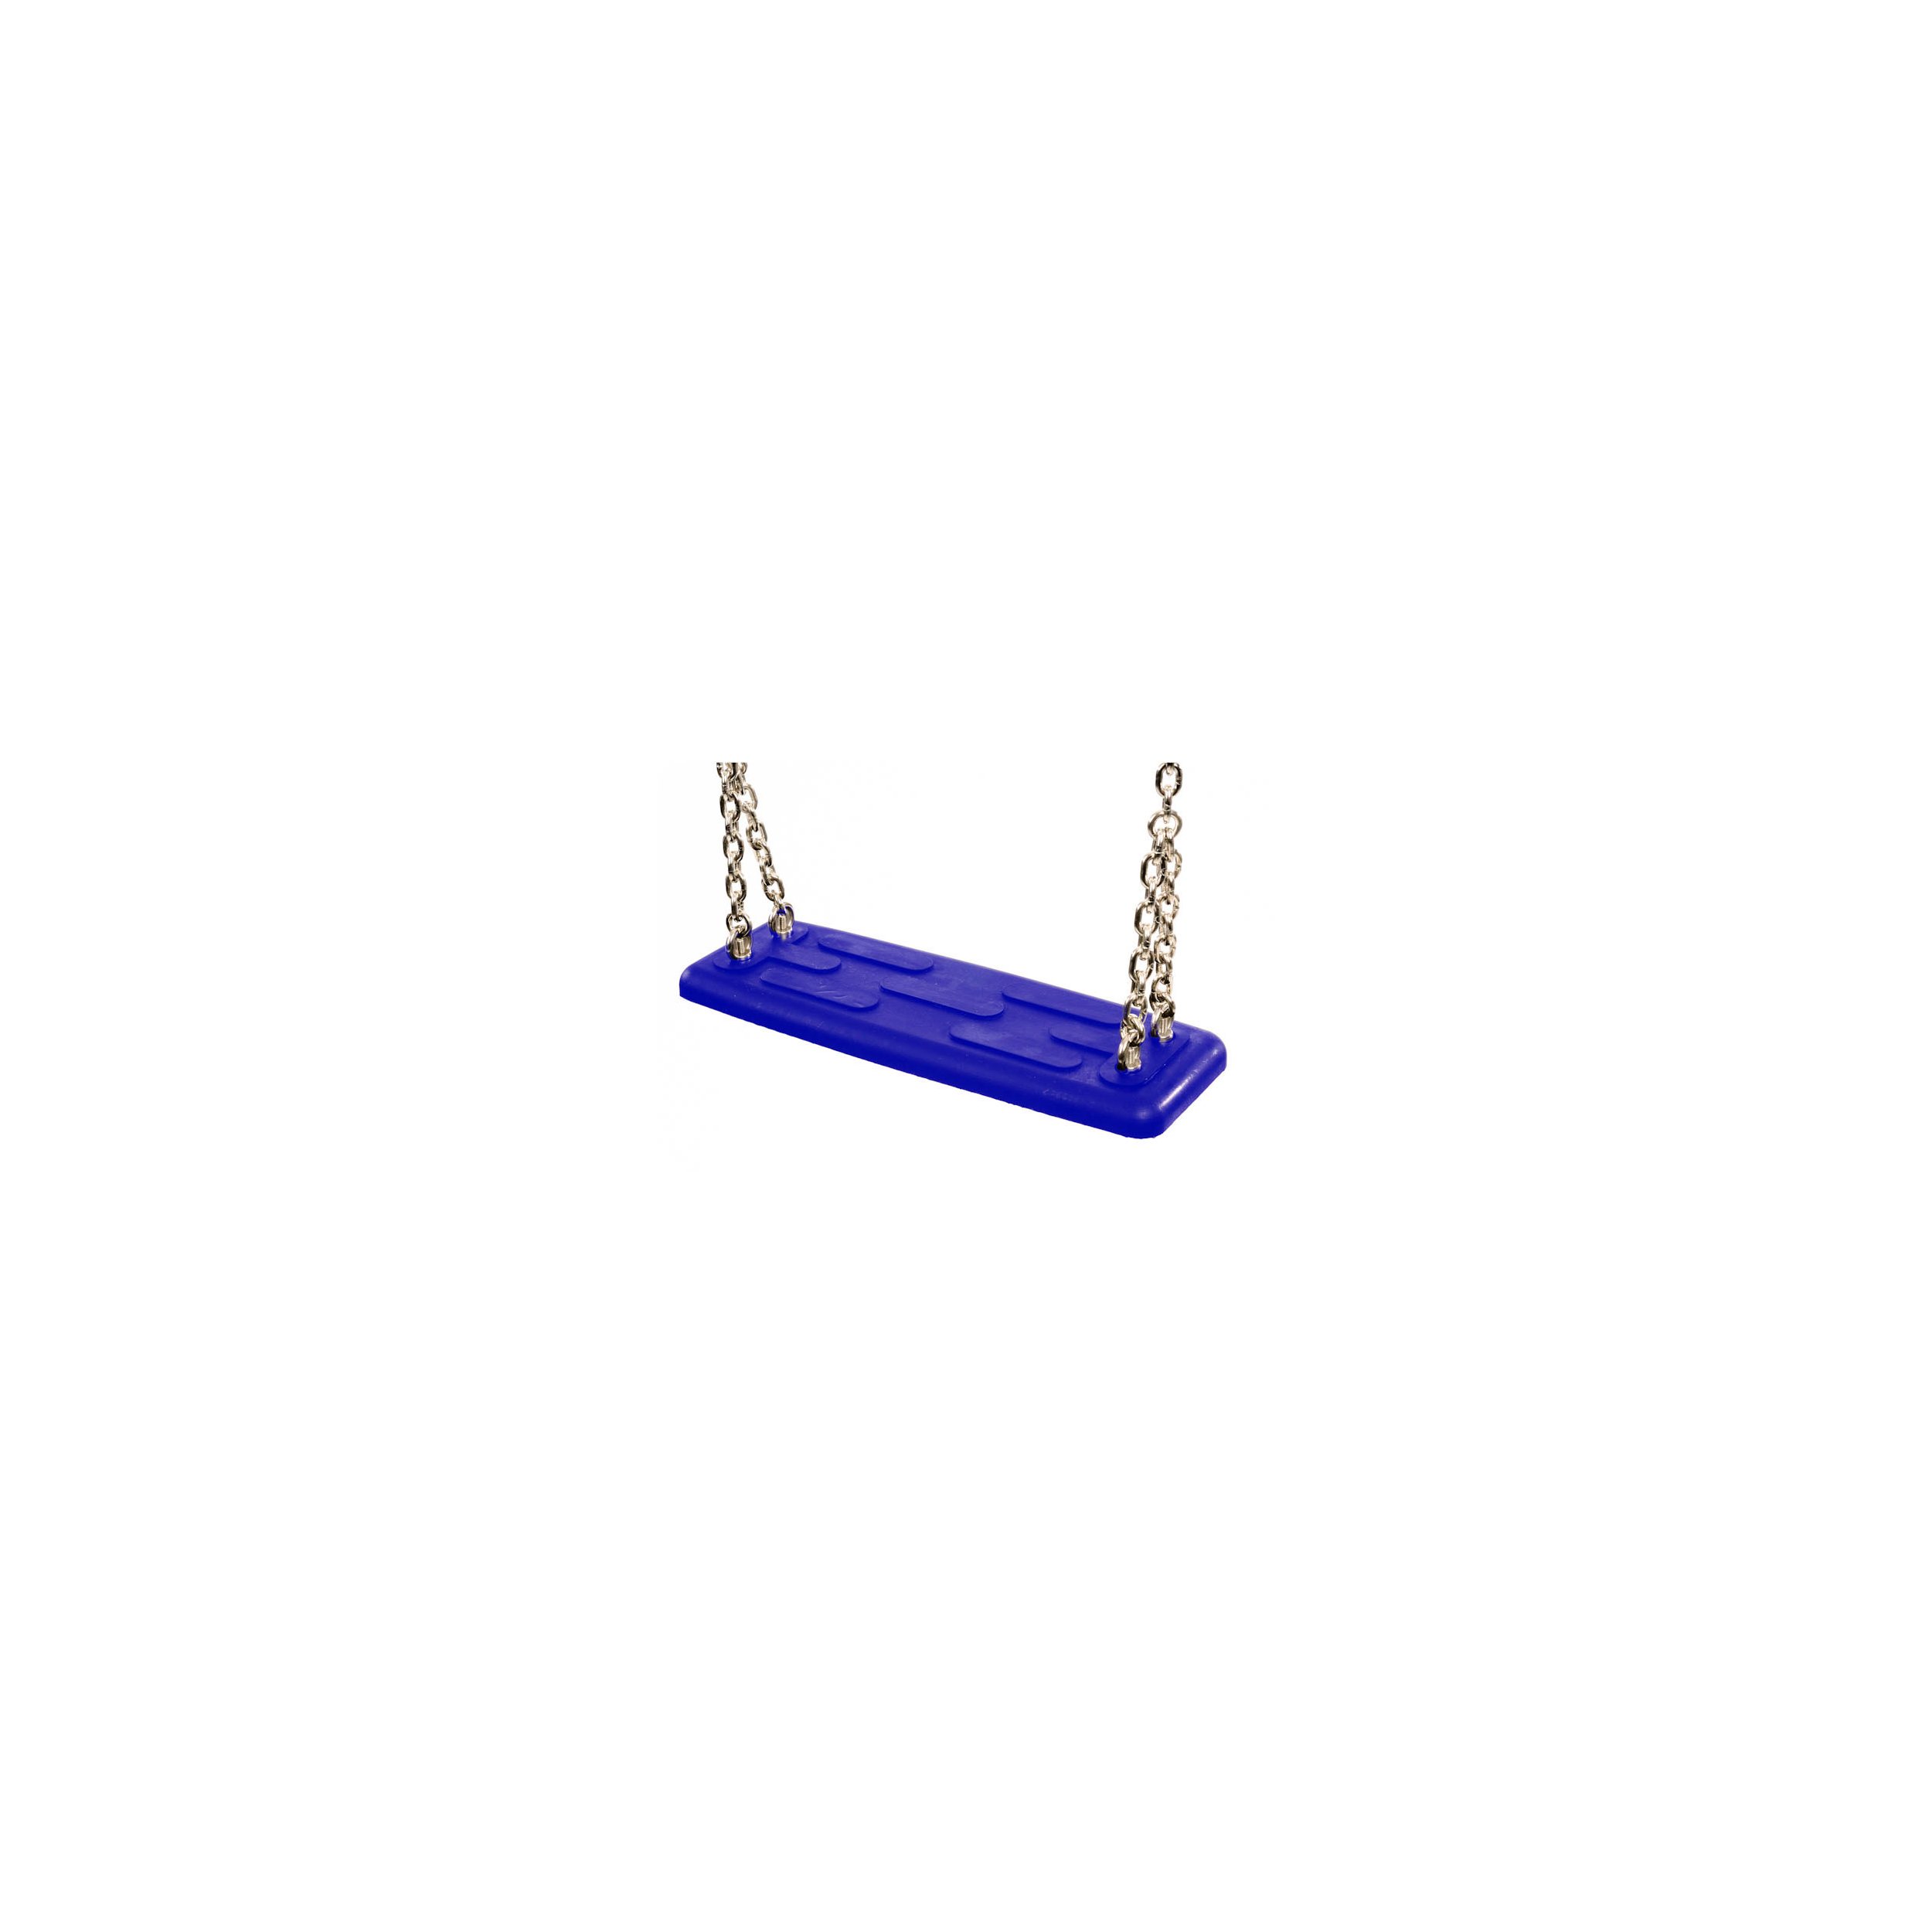 Commercial safety rubber swing seat type 1A blue stainless steel AISI 316 200 cm